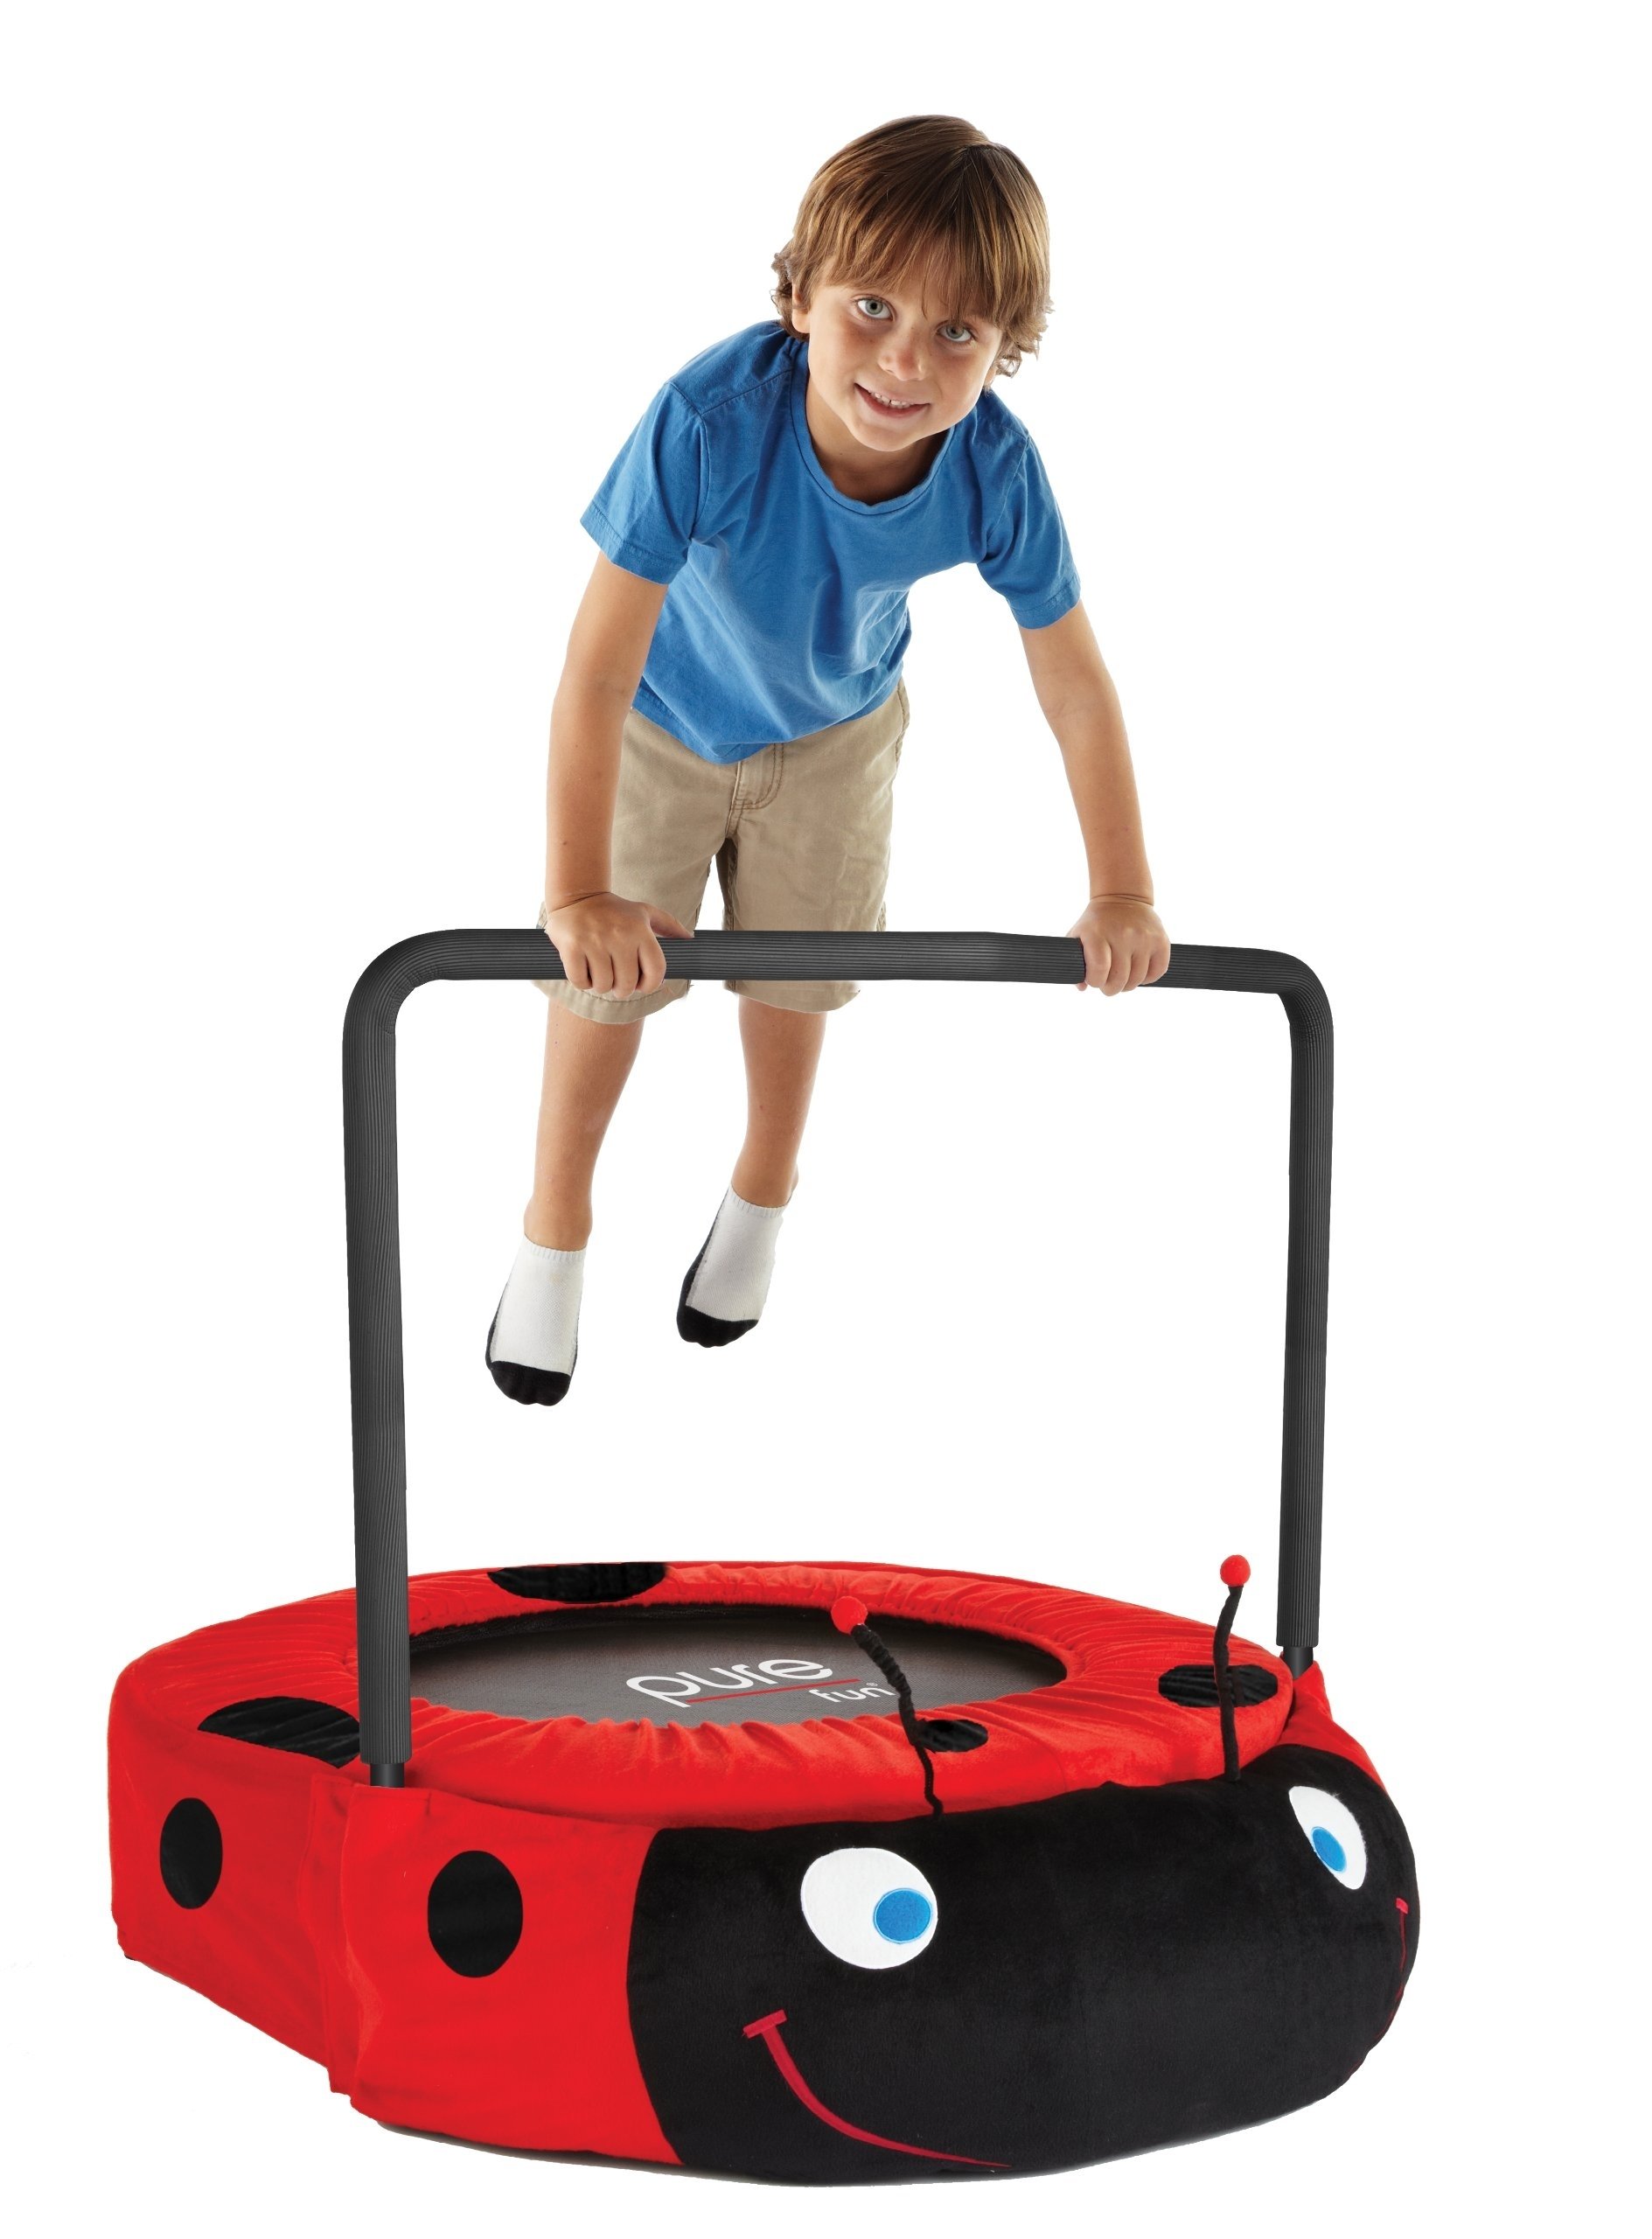 10 Famous Toy Ideas For 5 Year Old Boy best gifts and toys for 5 year old boys gift trampolines and toy 3 2023